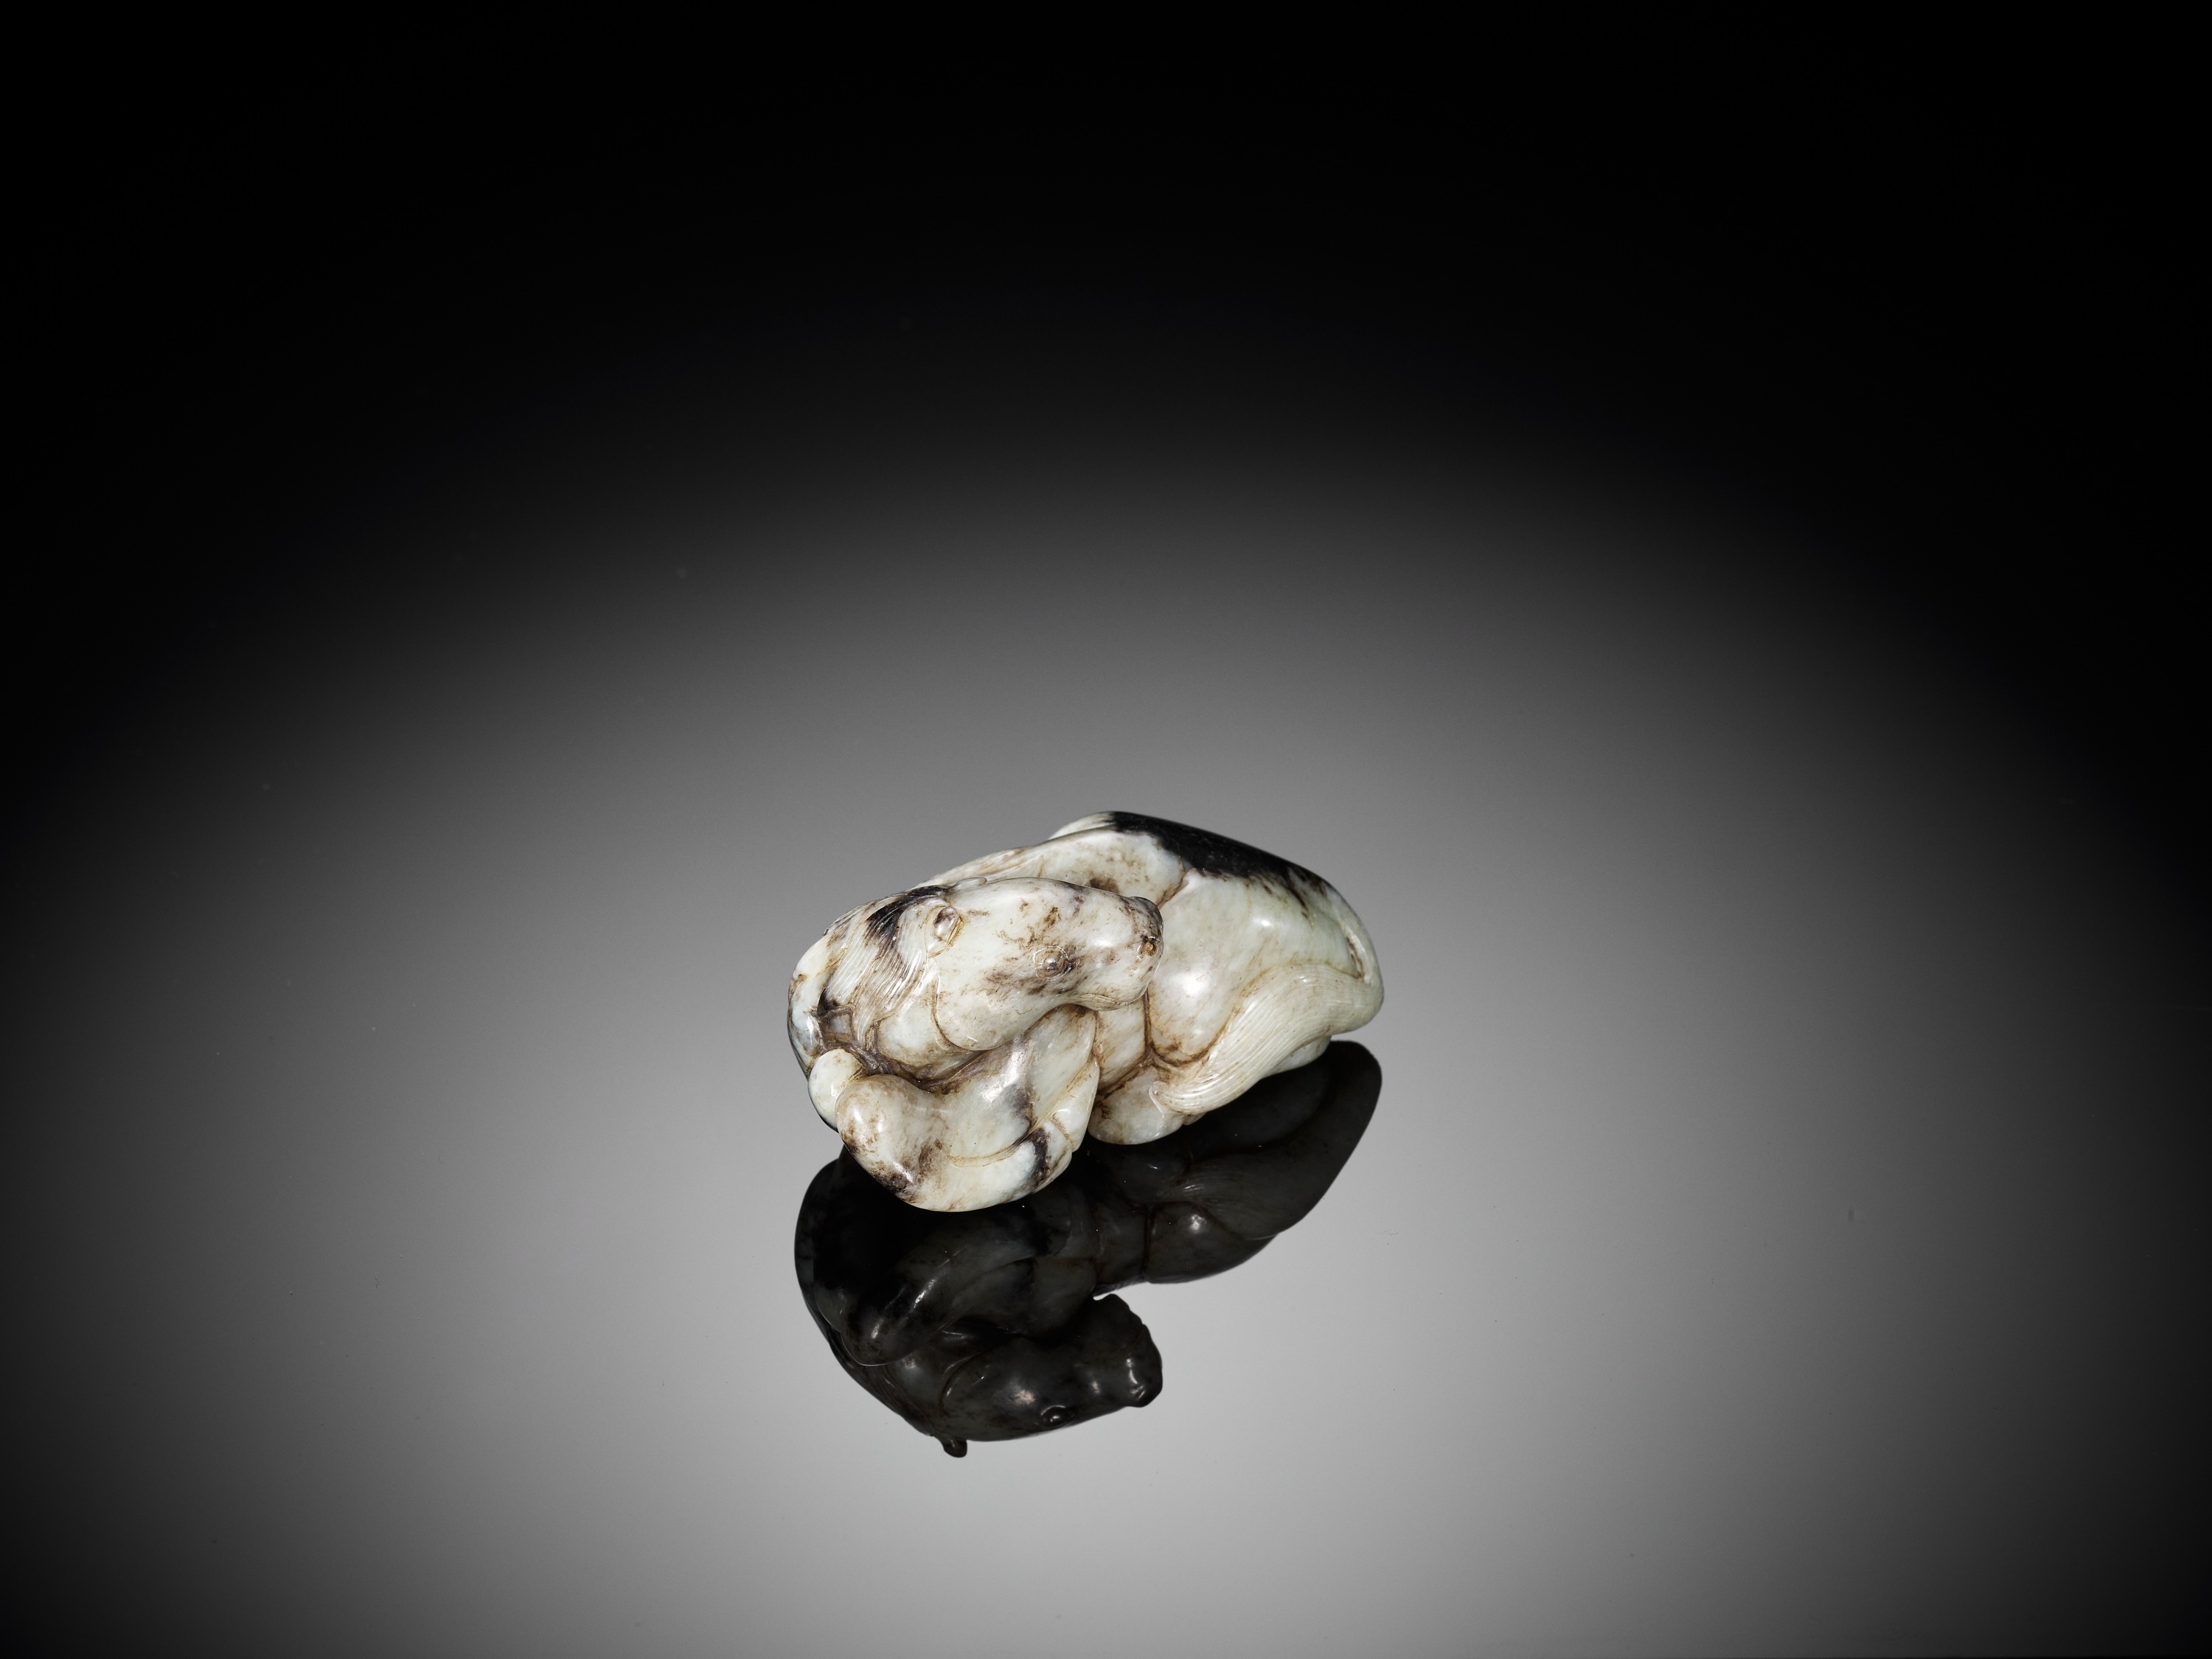 A GRAY AND BLACK NEPHRITE JADE FIGURE OF A HORSE, MING DYNASTY - Image 12 of 15